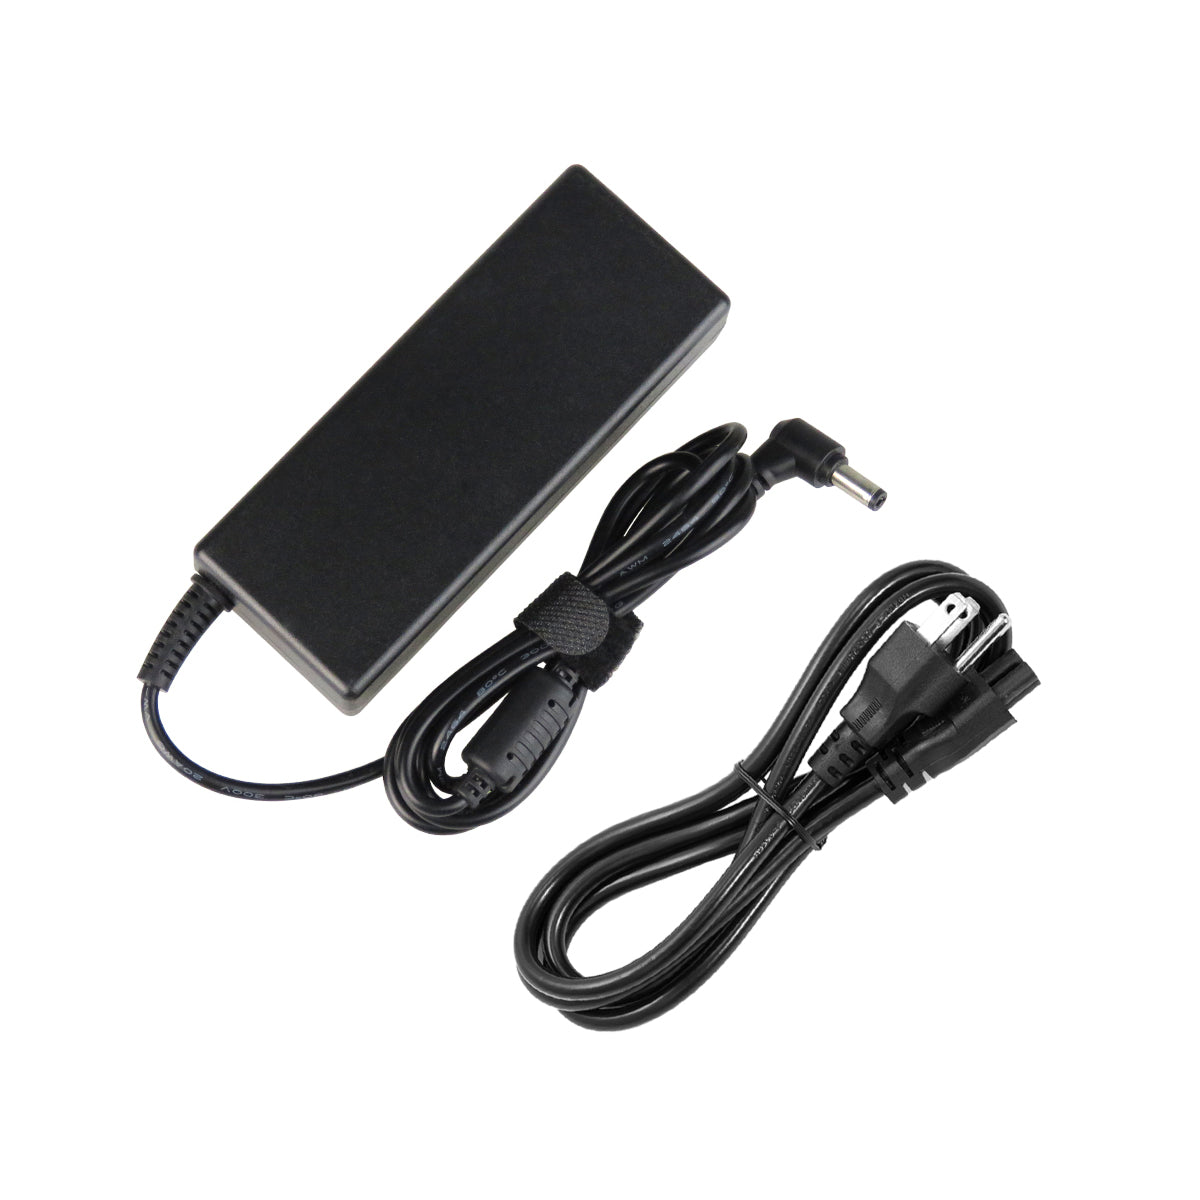 AC Adapter Charger for ASUS p55va Series Notebook.